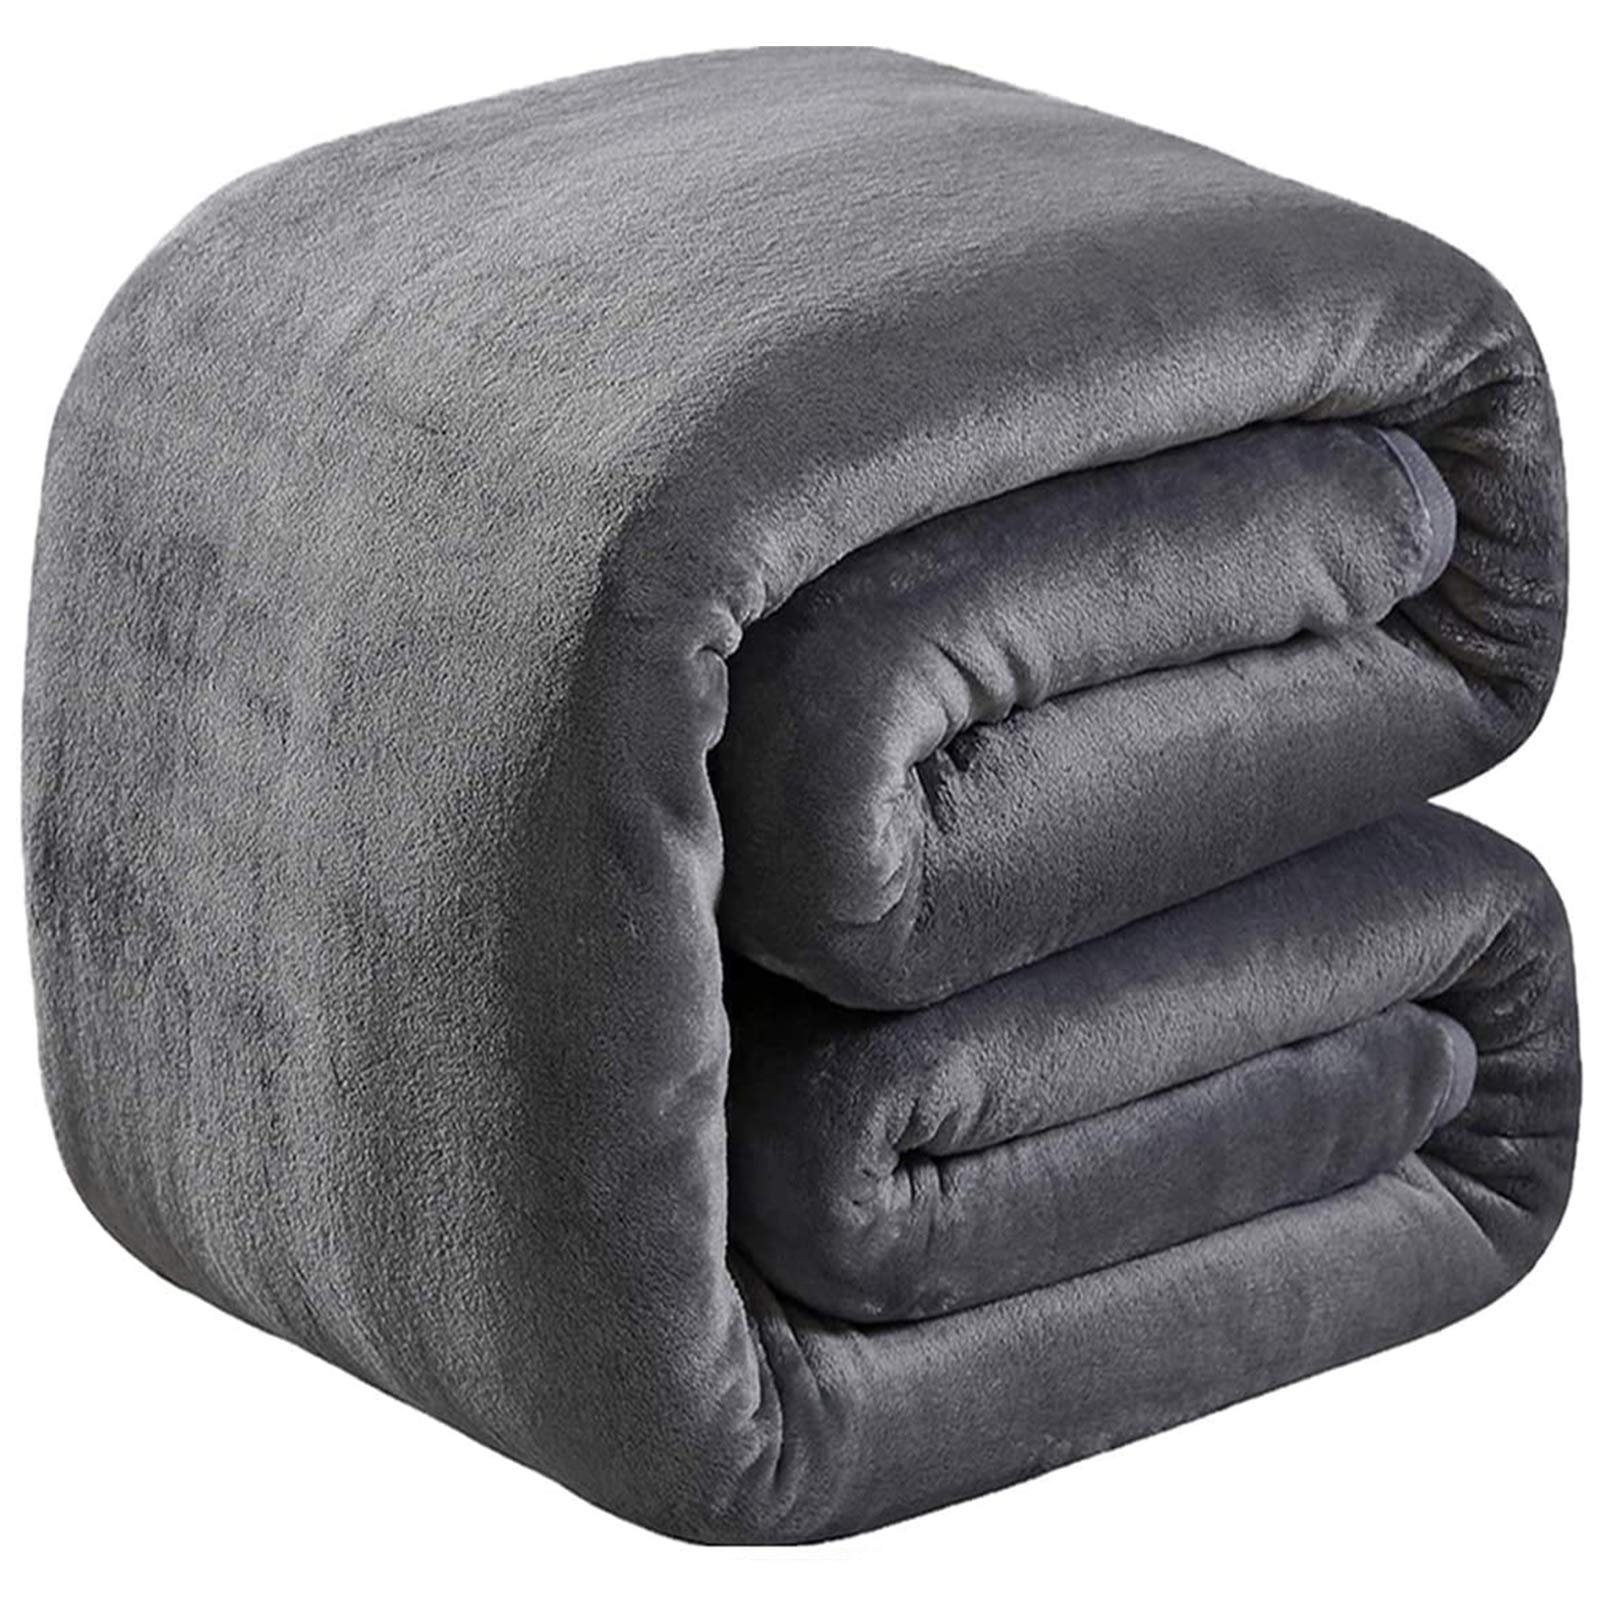 Book Cover Soft Queen Size Blanket for Fall Winter Spring All Season 350GSM Thicken Warm Fuzzy Microplush Lightweight Thermal Fleece Summer Autumn Blankets for Queen/Full size Bed Sofa SOFTCARE Dark Gray 90